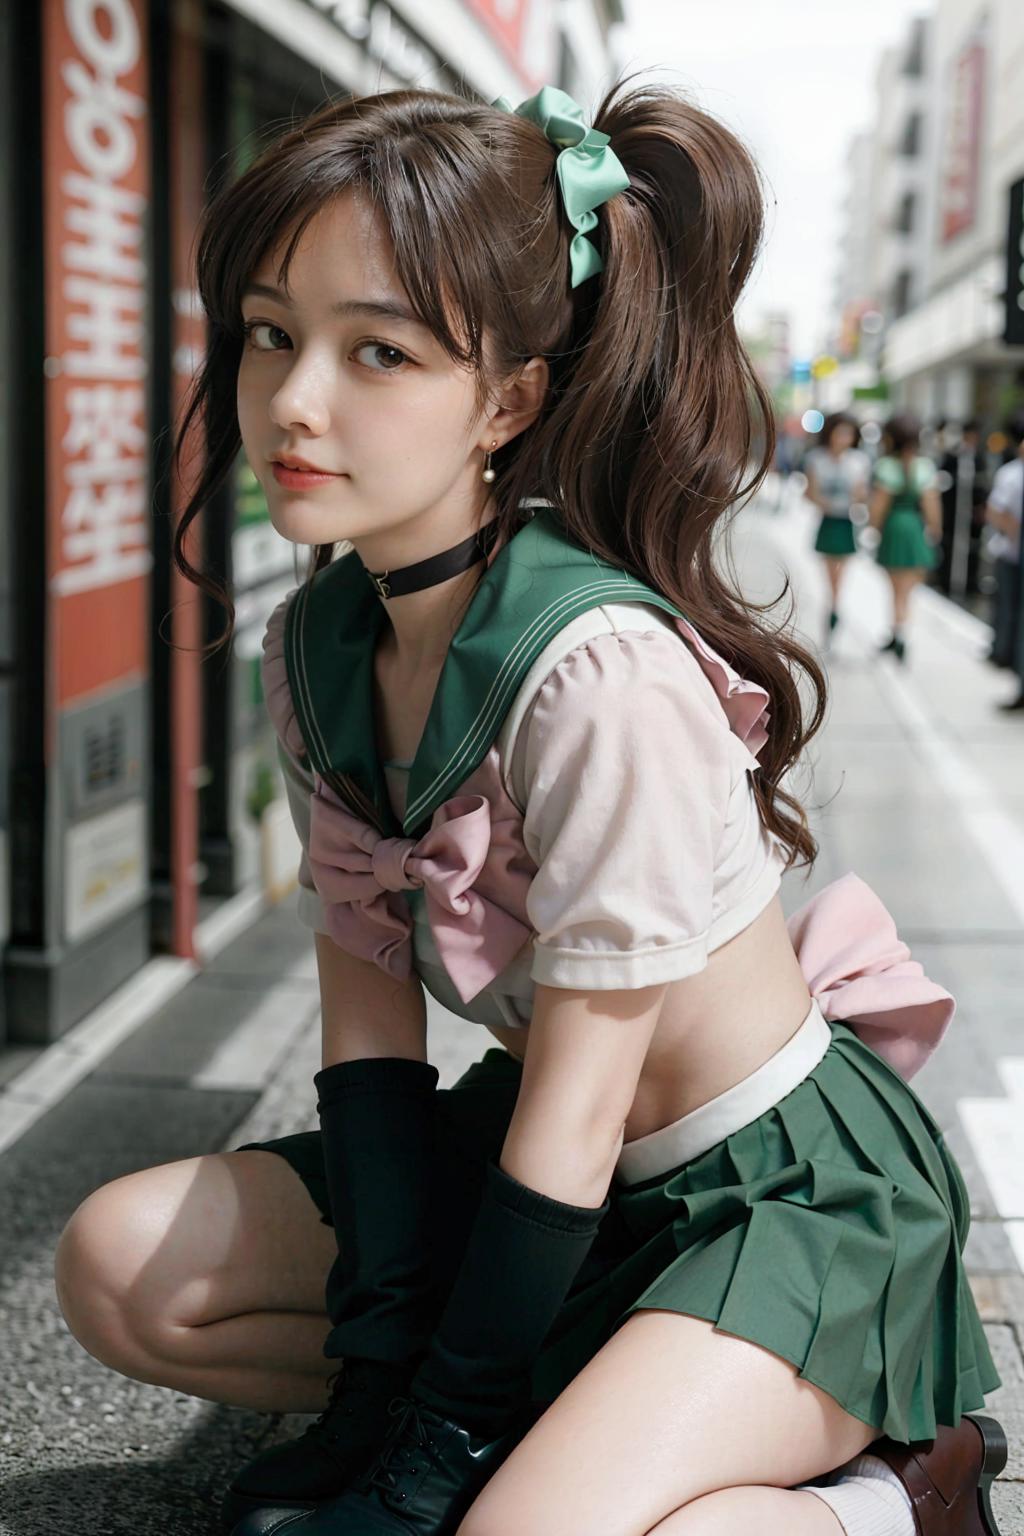 Asian Woman in School Uniform Sitting on Street with Pink Ribbon in Hair